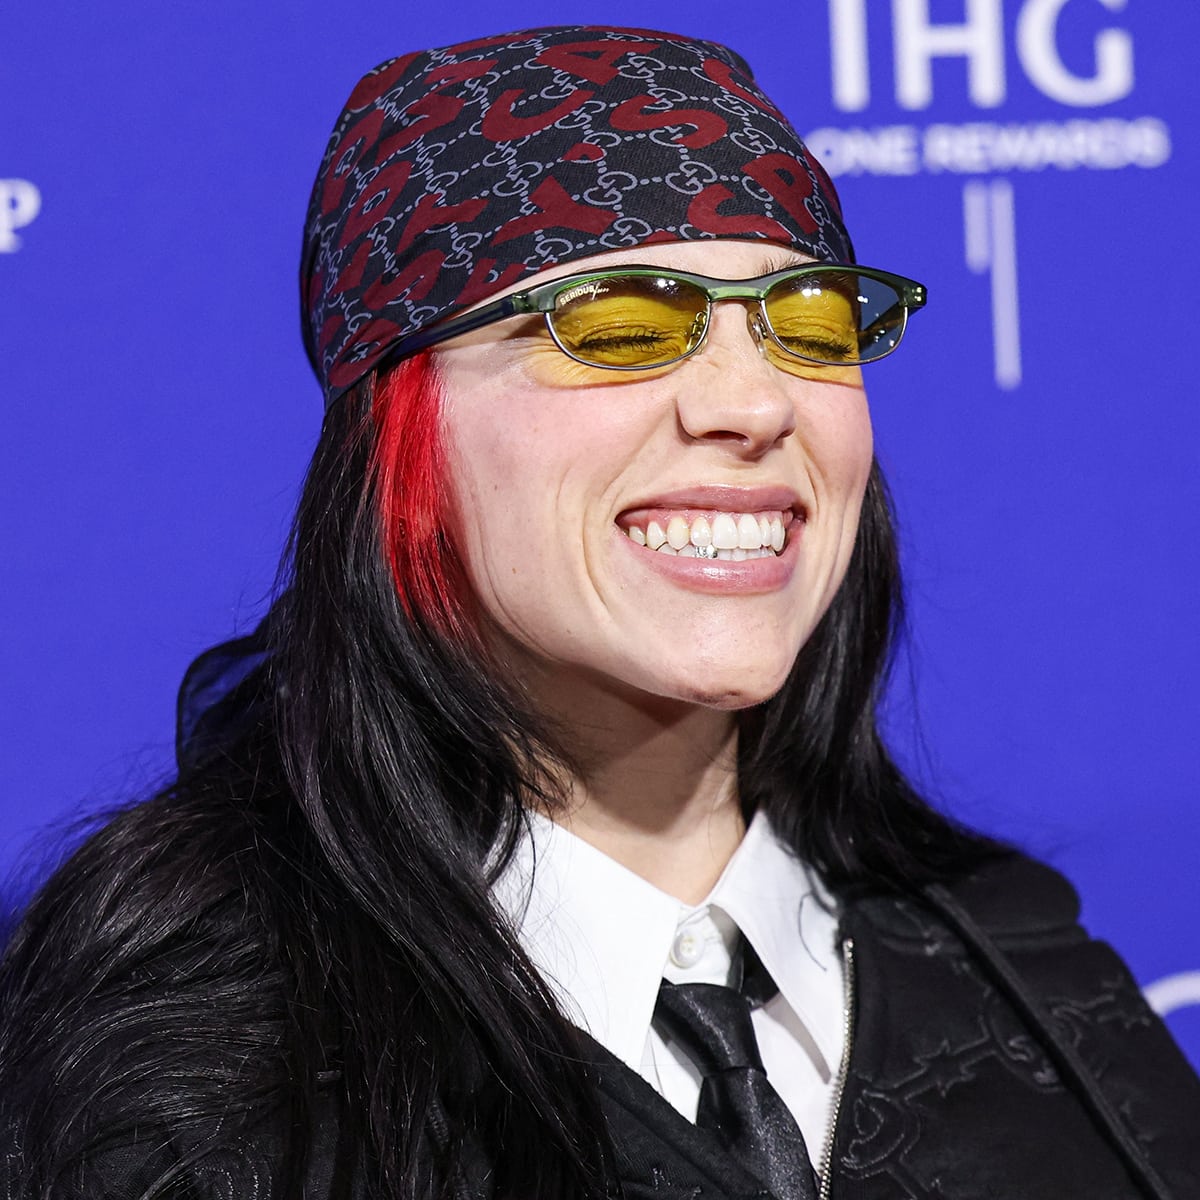 Billie Eilish styles her look with a red and black Gucci headscarf and a pair of Alpina Chillout yellow-tinted sunglasses